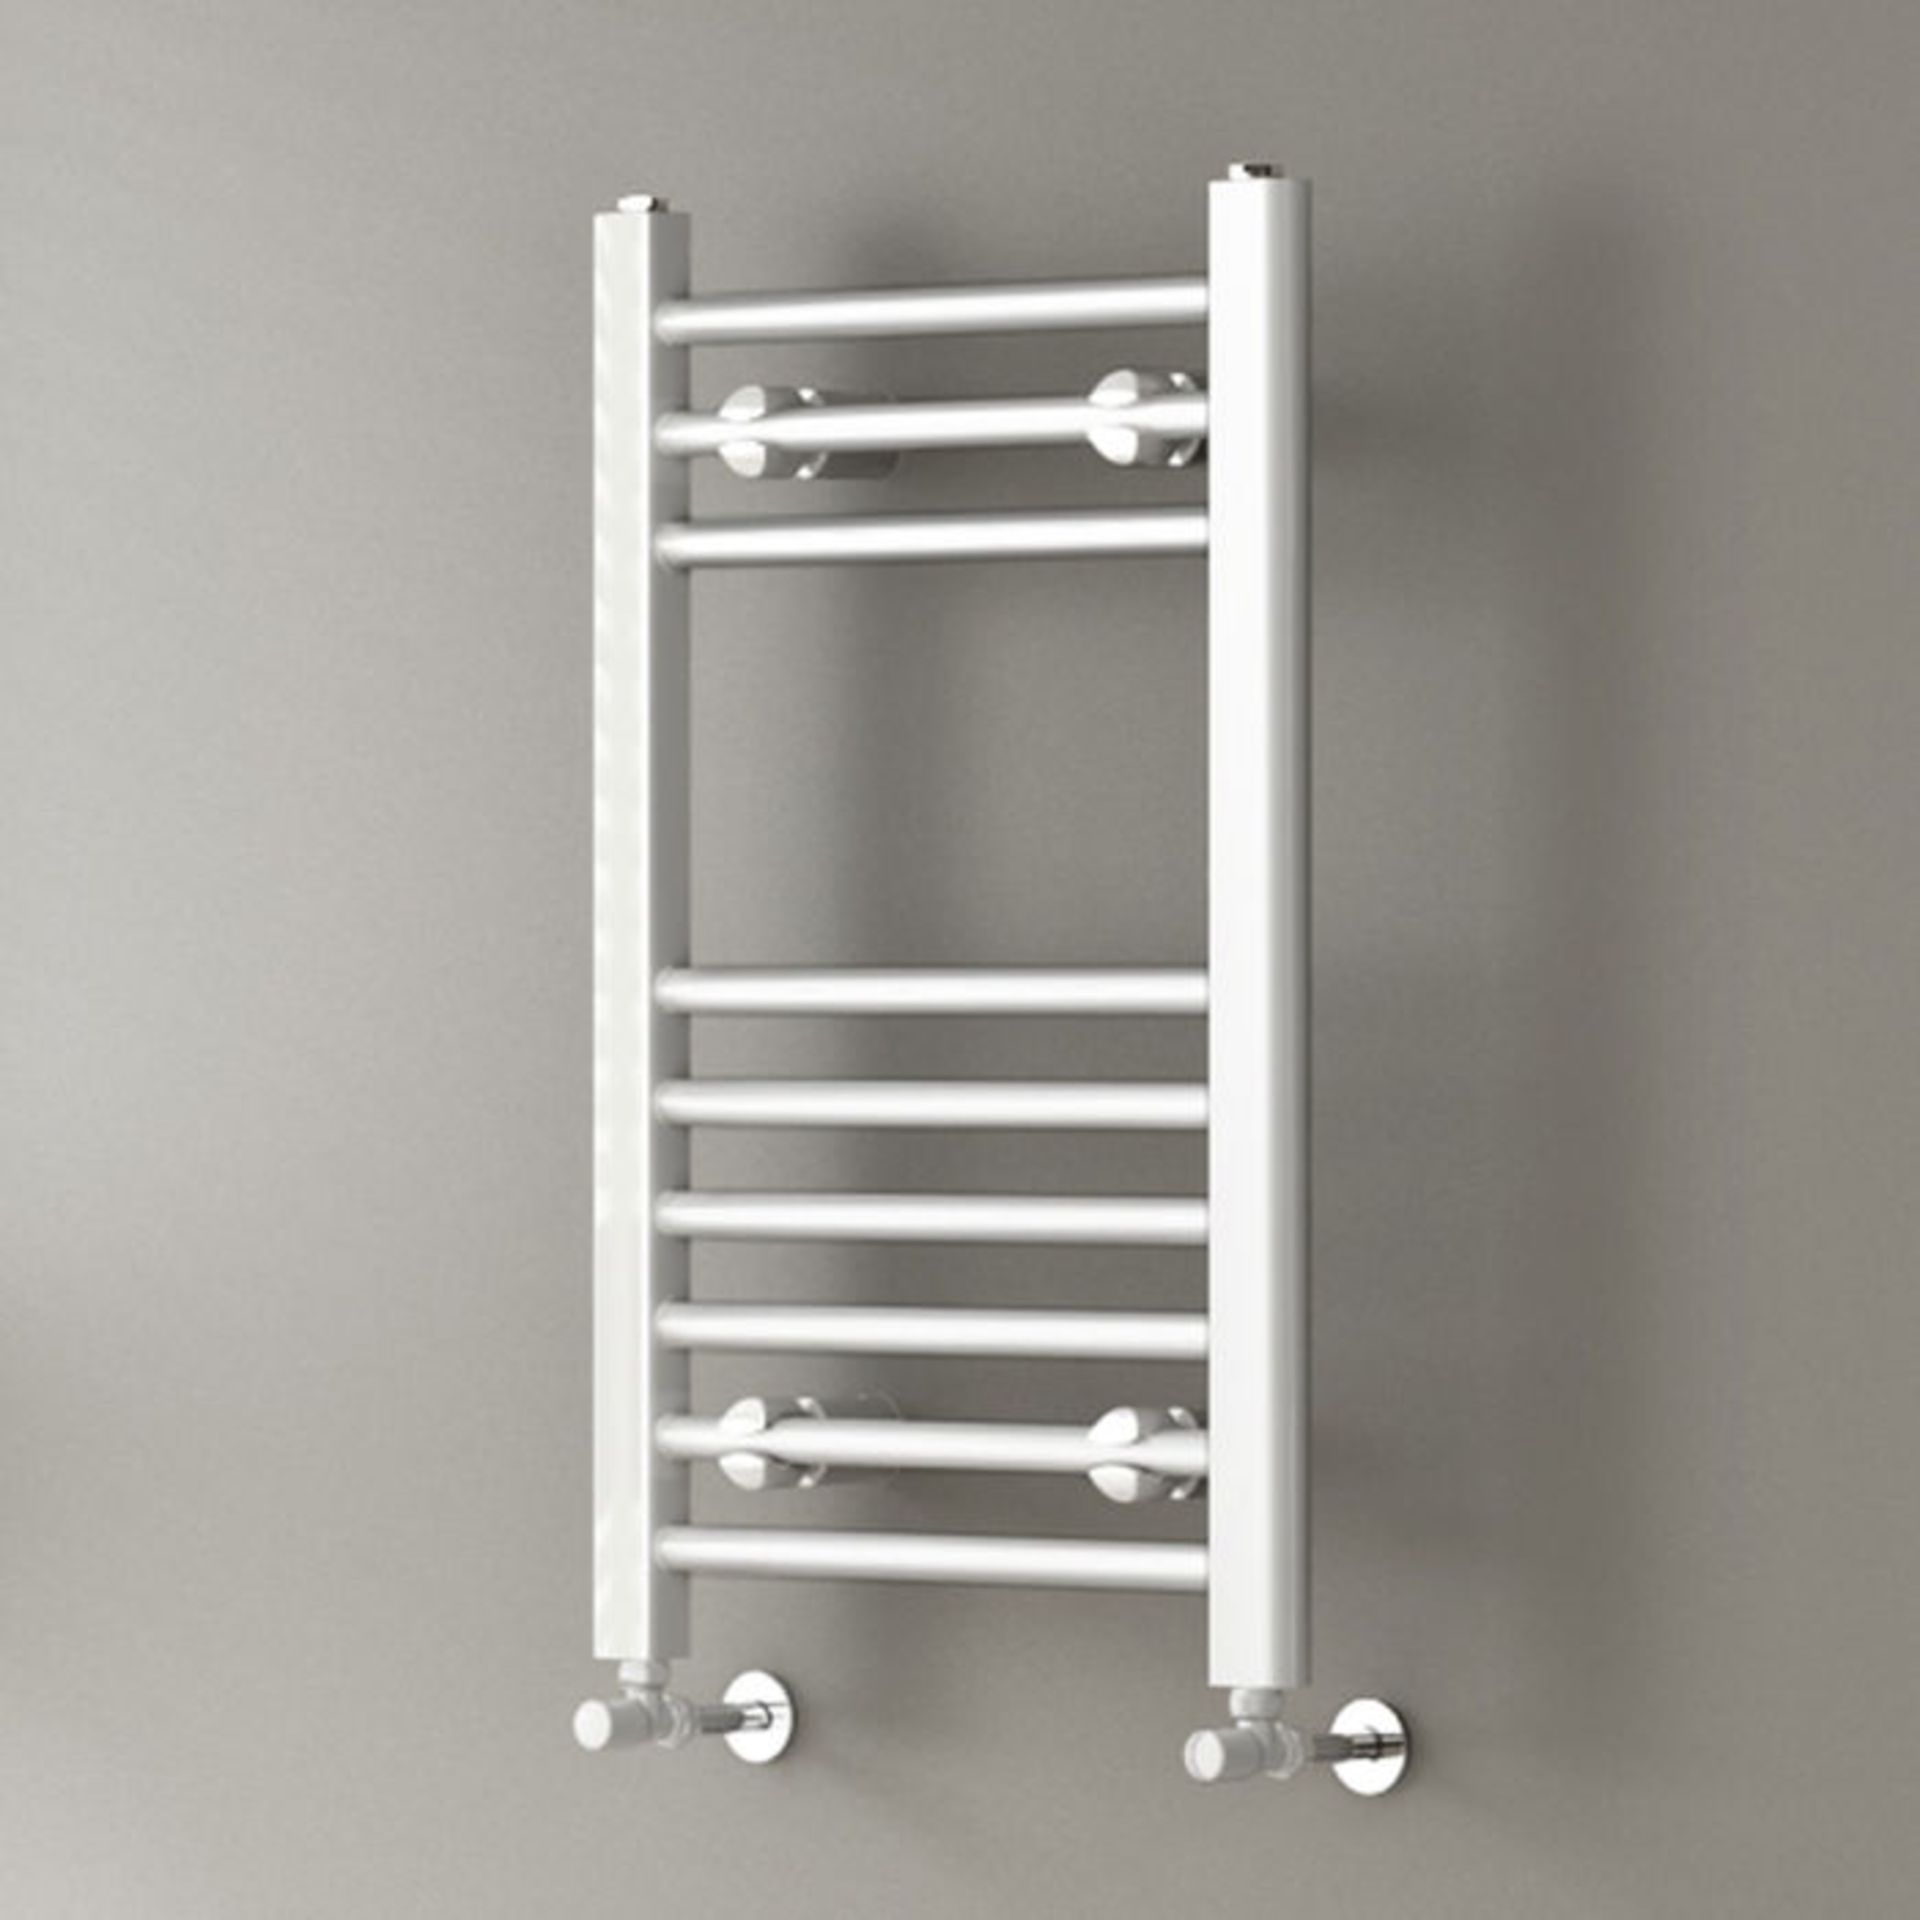 (W246) 650x400mm White Straight Rail Ladder Towel Radiator. Made from low carbon steel Finished with